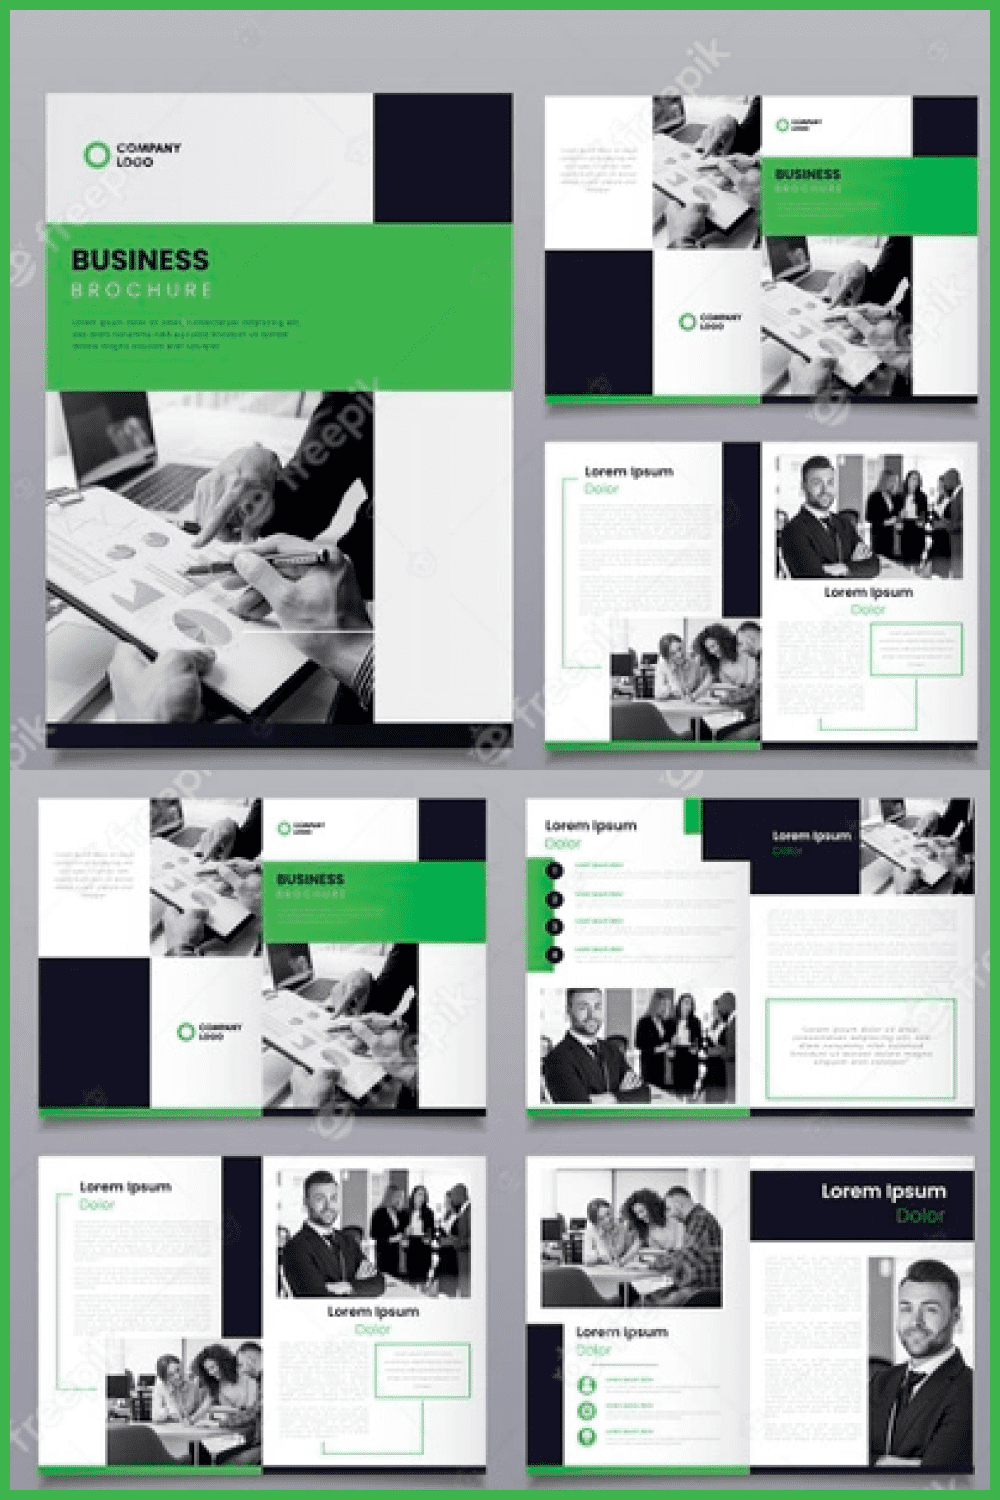 Creative template in grey and green.